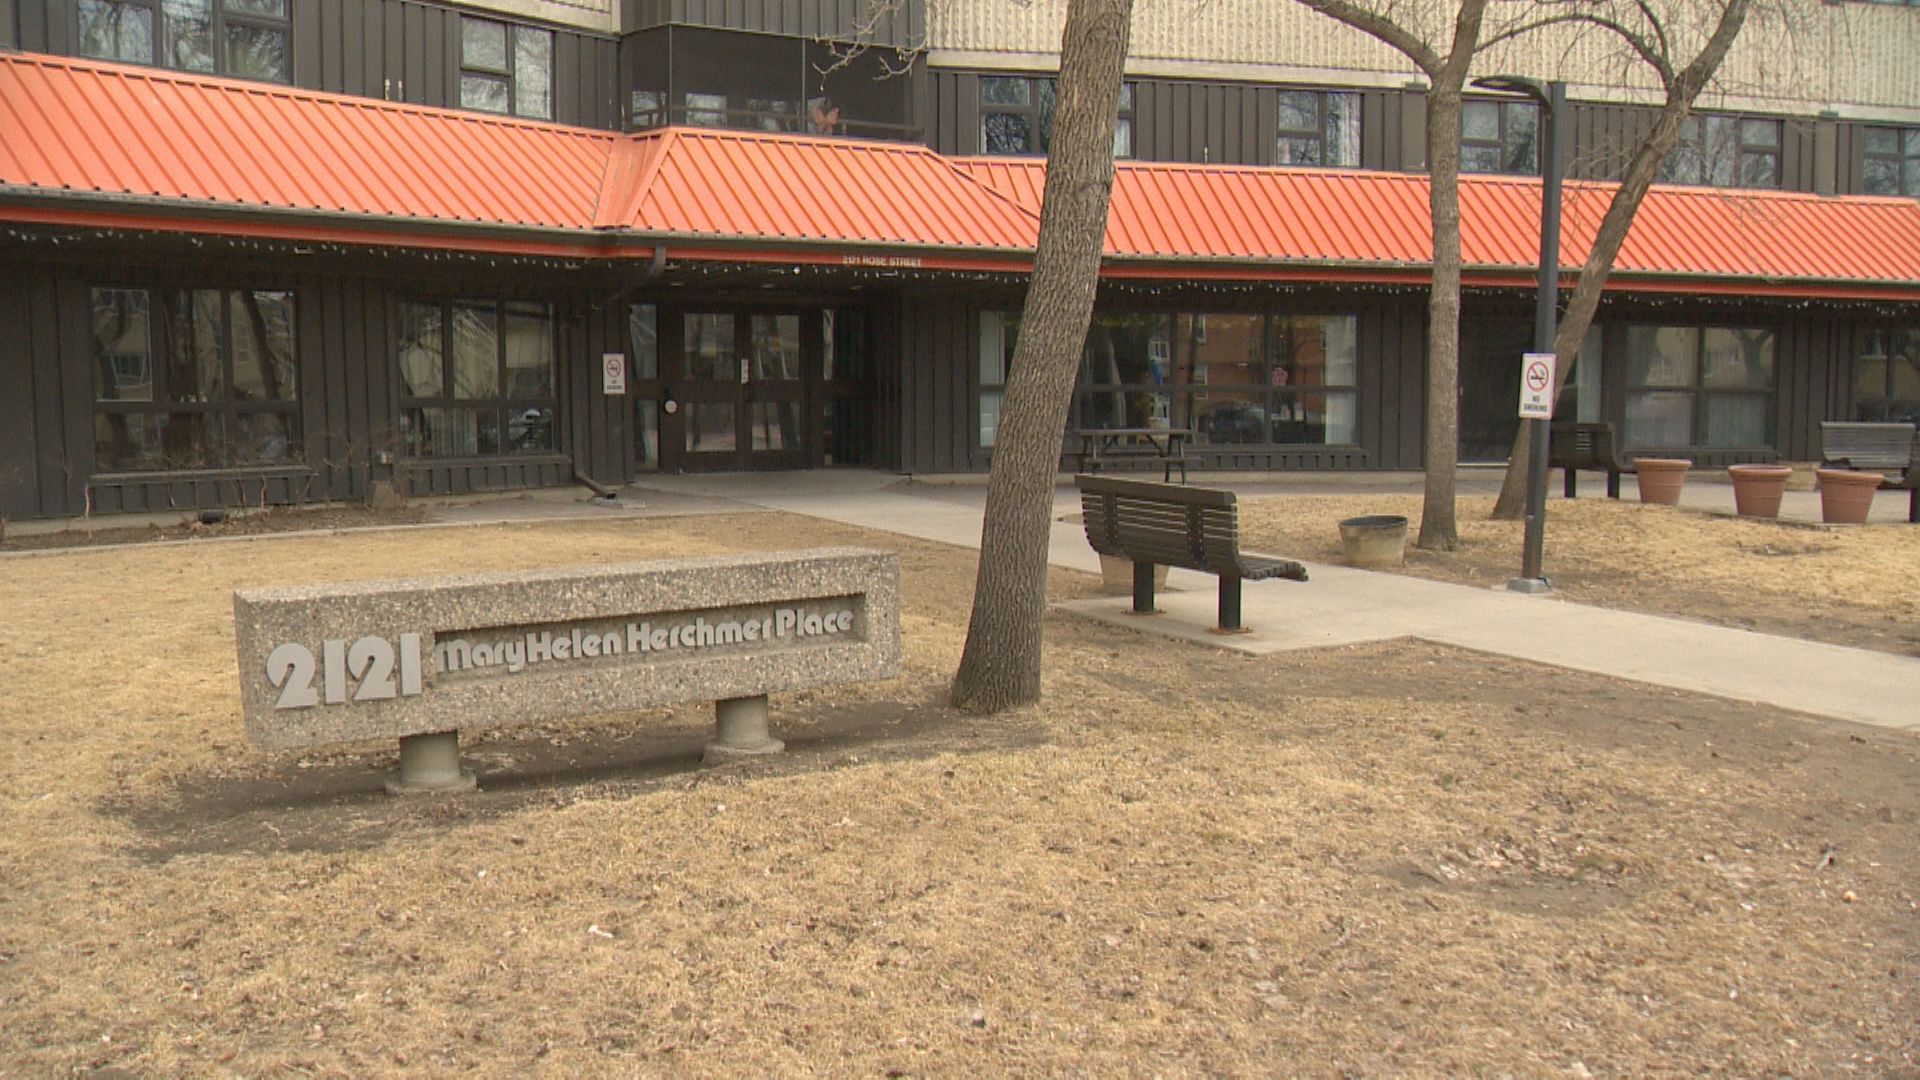 Regina seniors’ meeting with housing representatives over safety issues ‘disappointing’